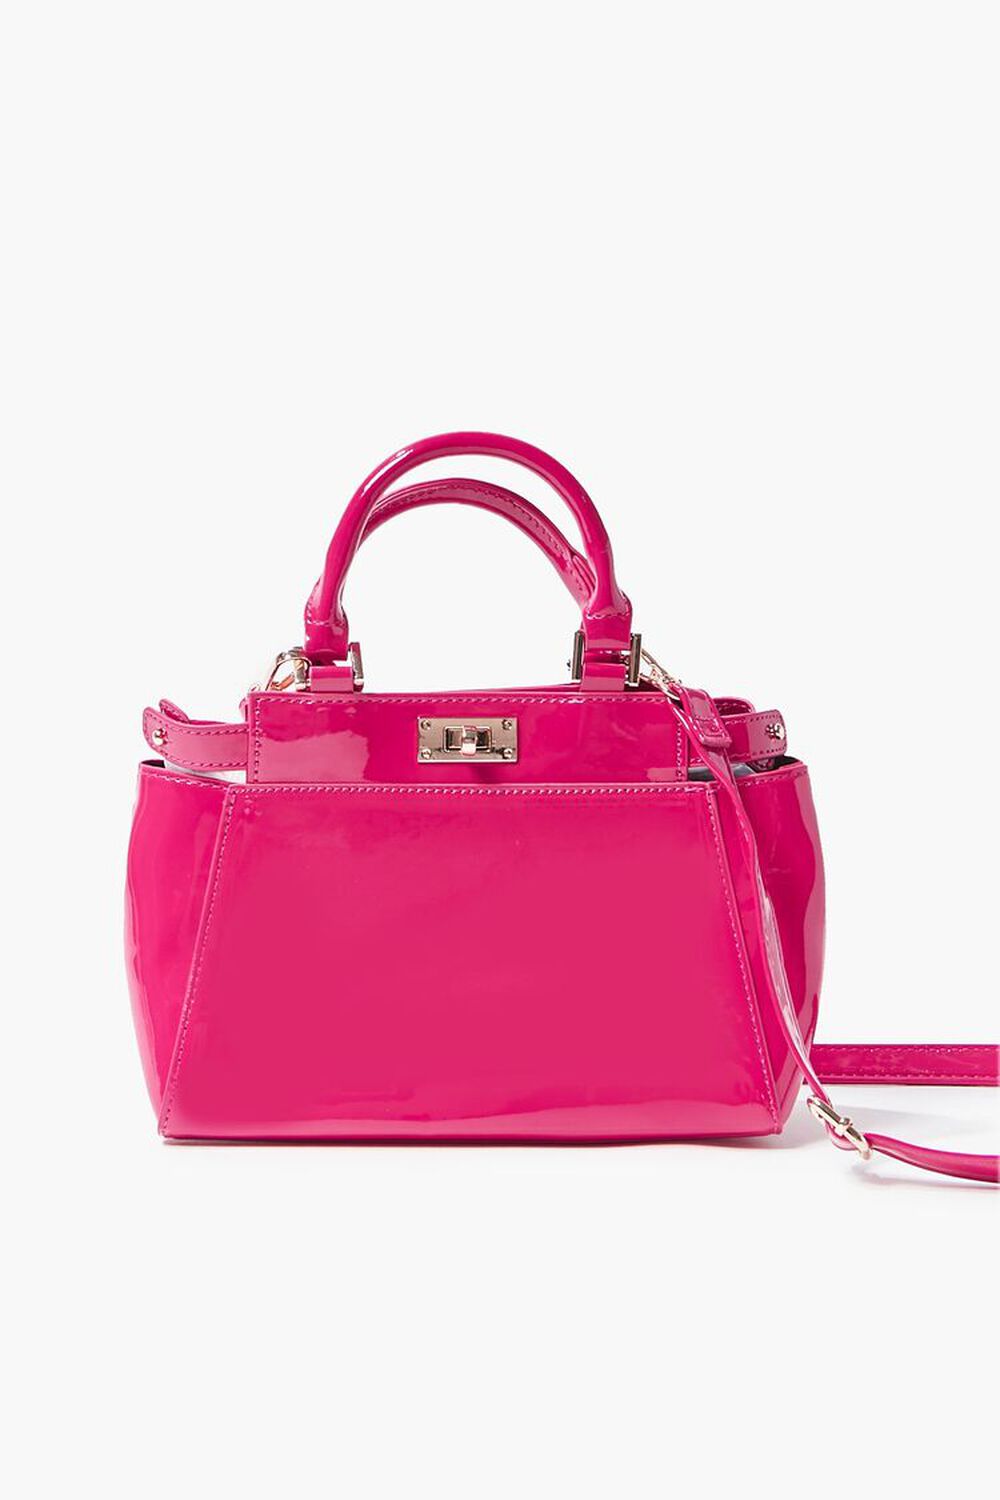 PINK Faux Patent Leather Crossbody Bag, image 1